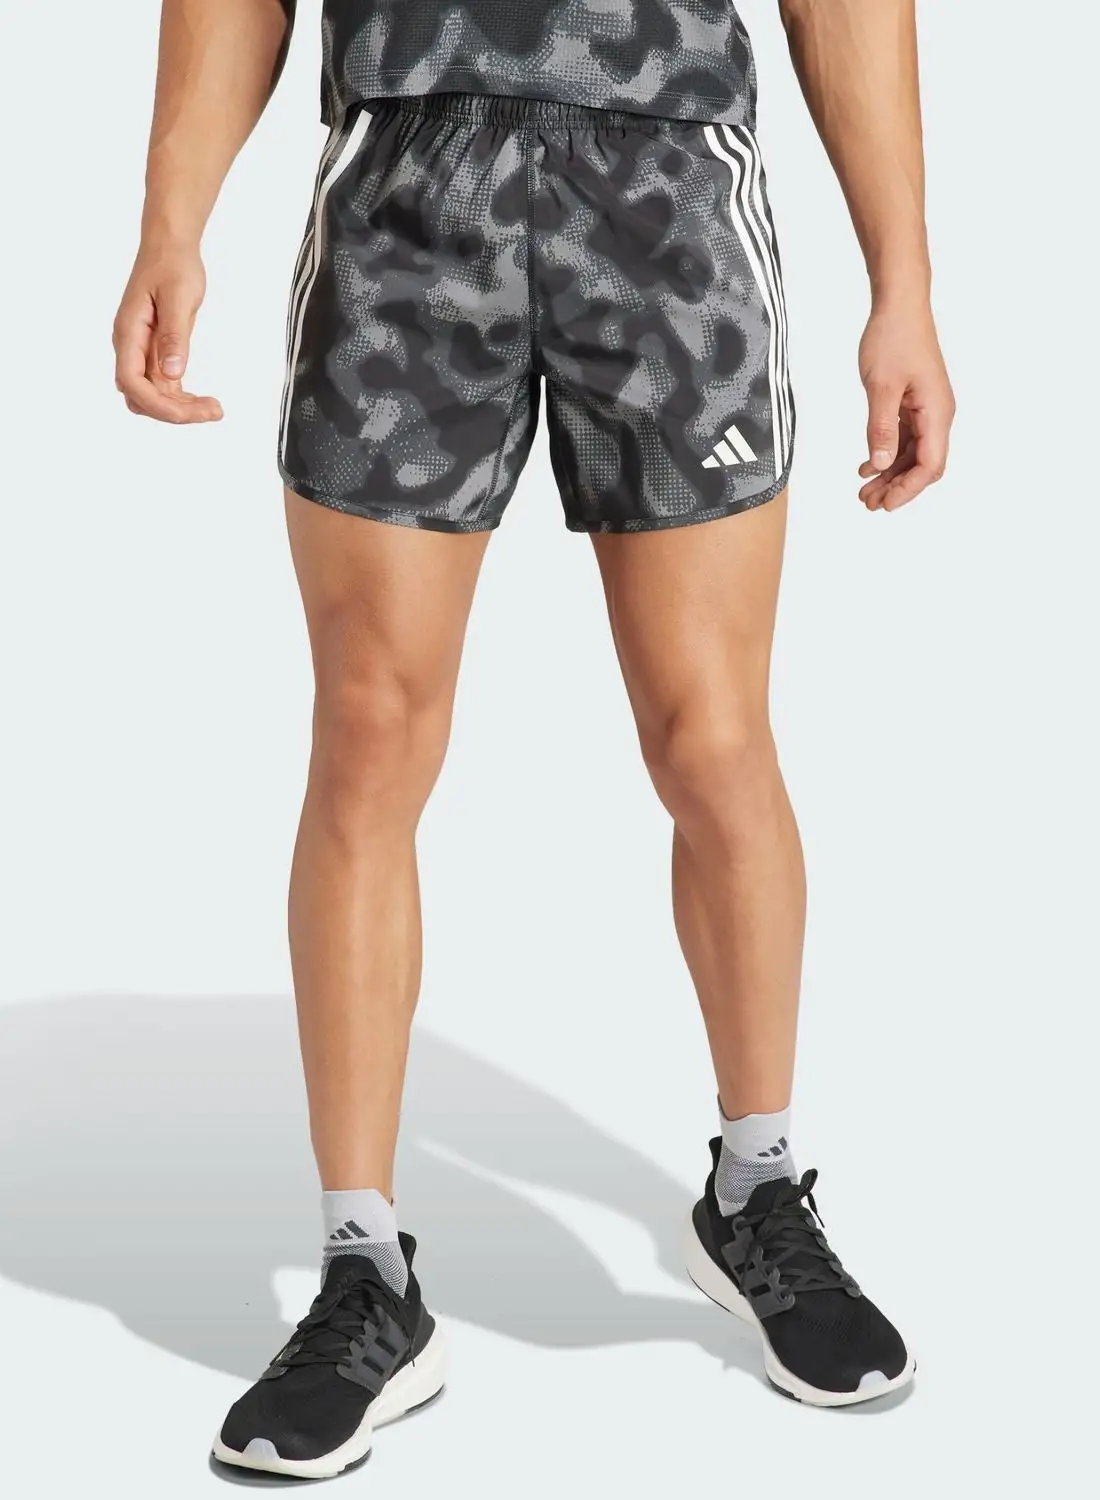 Adidas 3 Stripes Own The Run All Over Printed Shorts